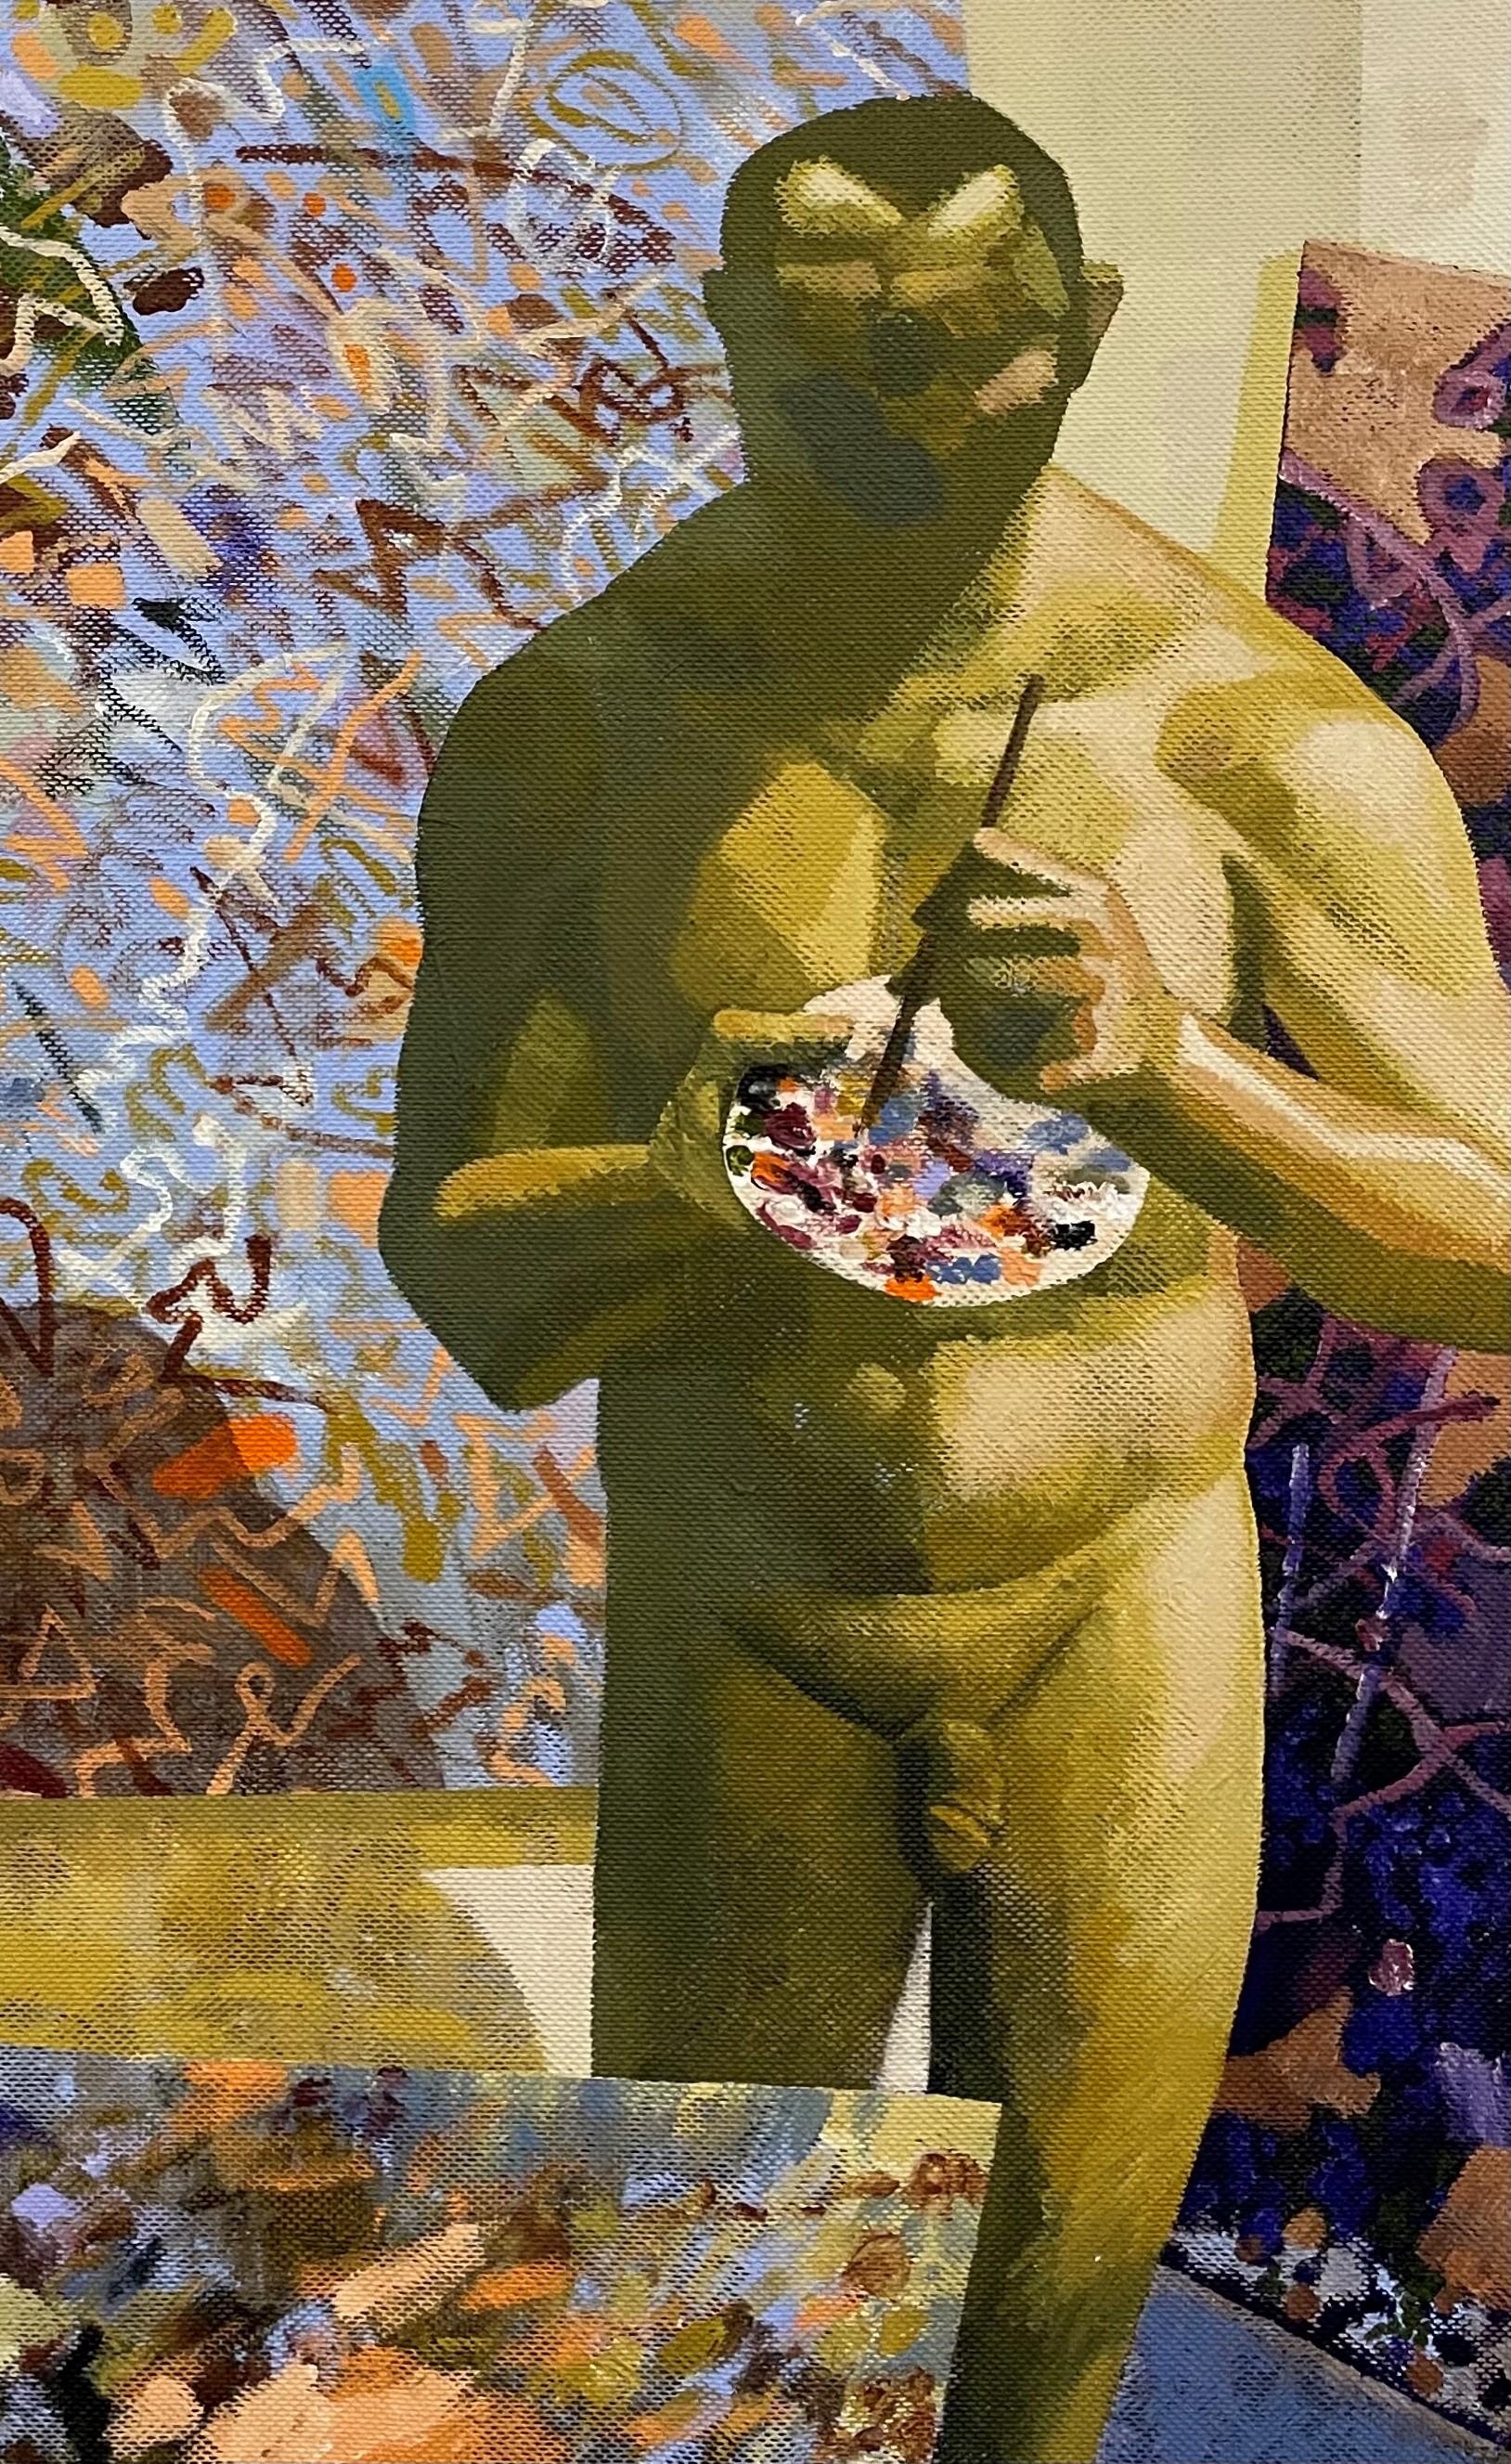 Le Chef d'oeuvre inconnu - 21st Century, Male, Nude, Contemporary, Yellow - Painting by Alexandru Rădvan